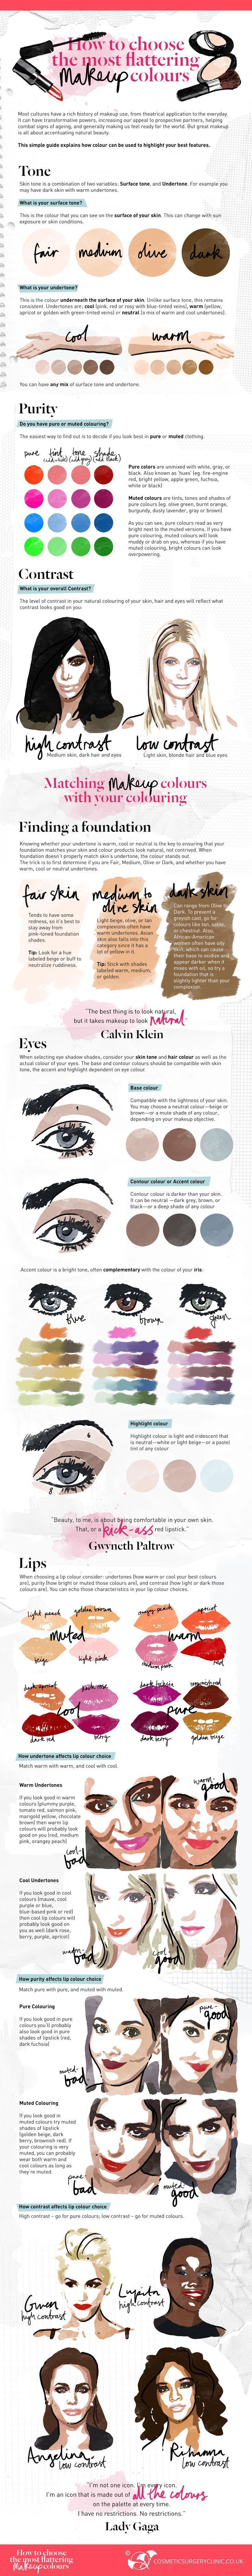 How to Choose the Most Flattering Makeup Colors for Your Skin Tone makeuptutoria...